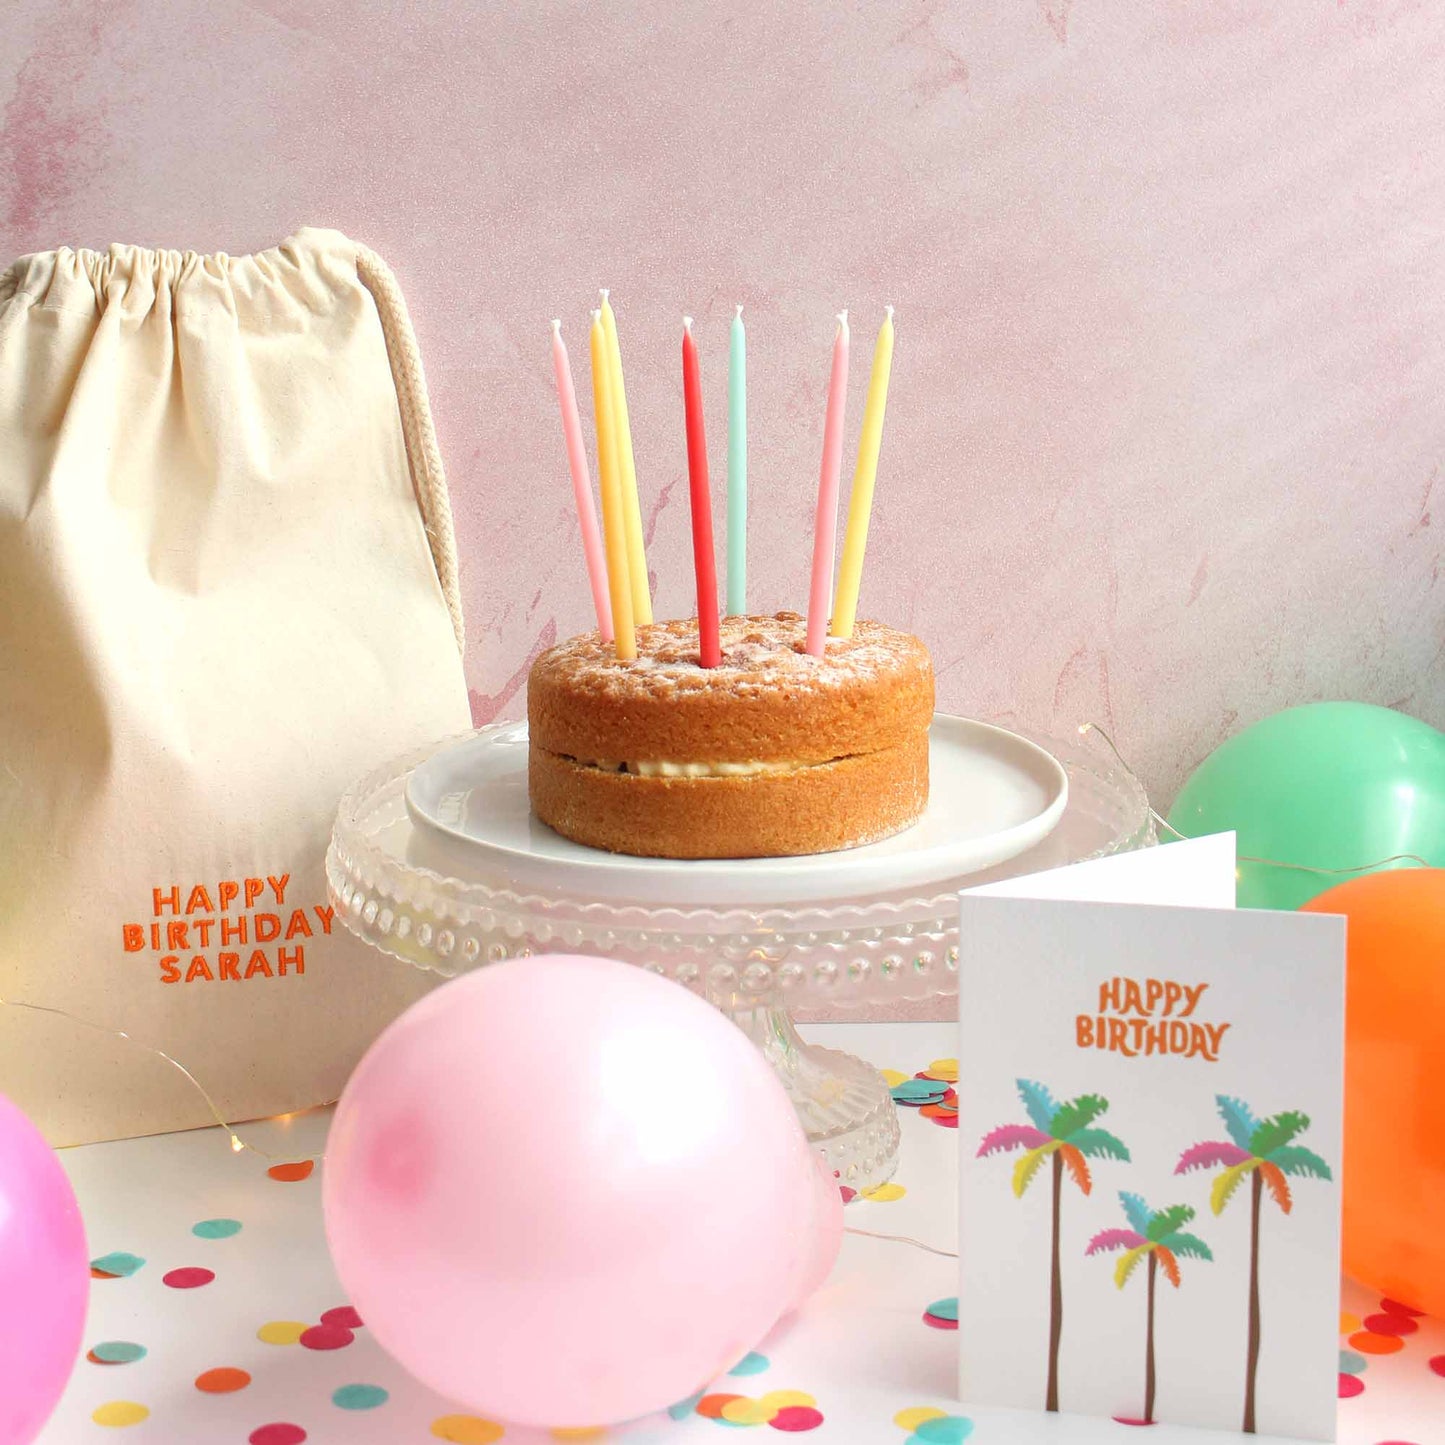 Image of birthday special scene with a cake with colourful beeswax candles, a personalised drawstring bag, colourful balloons, greeting cards and confetti all on a white table in front of a pink wall.